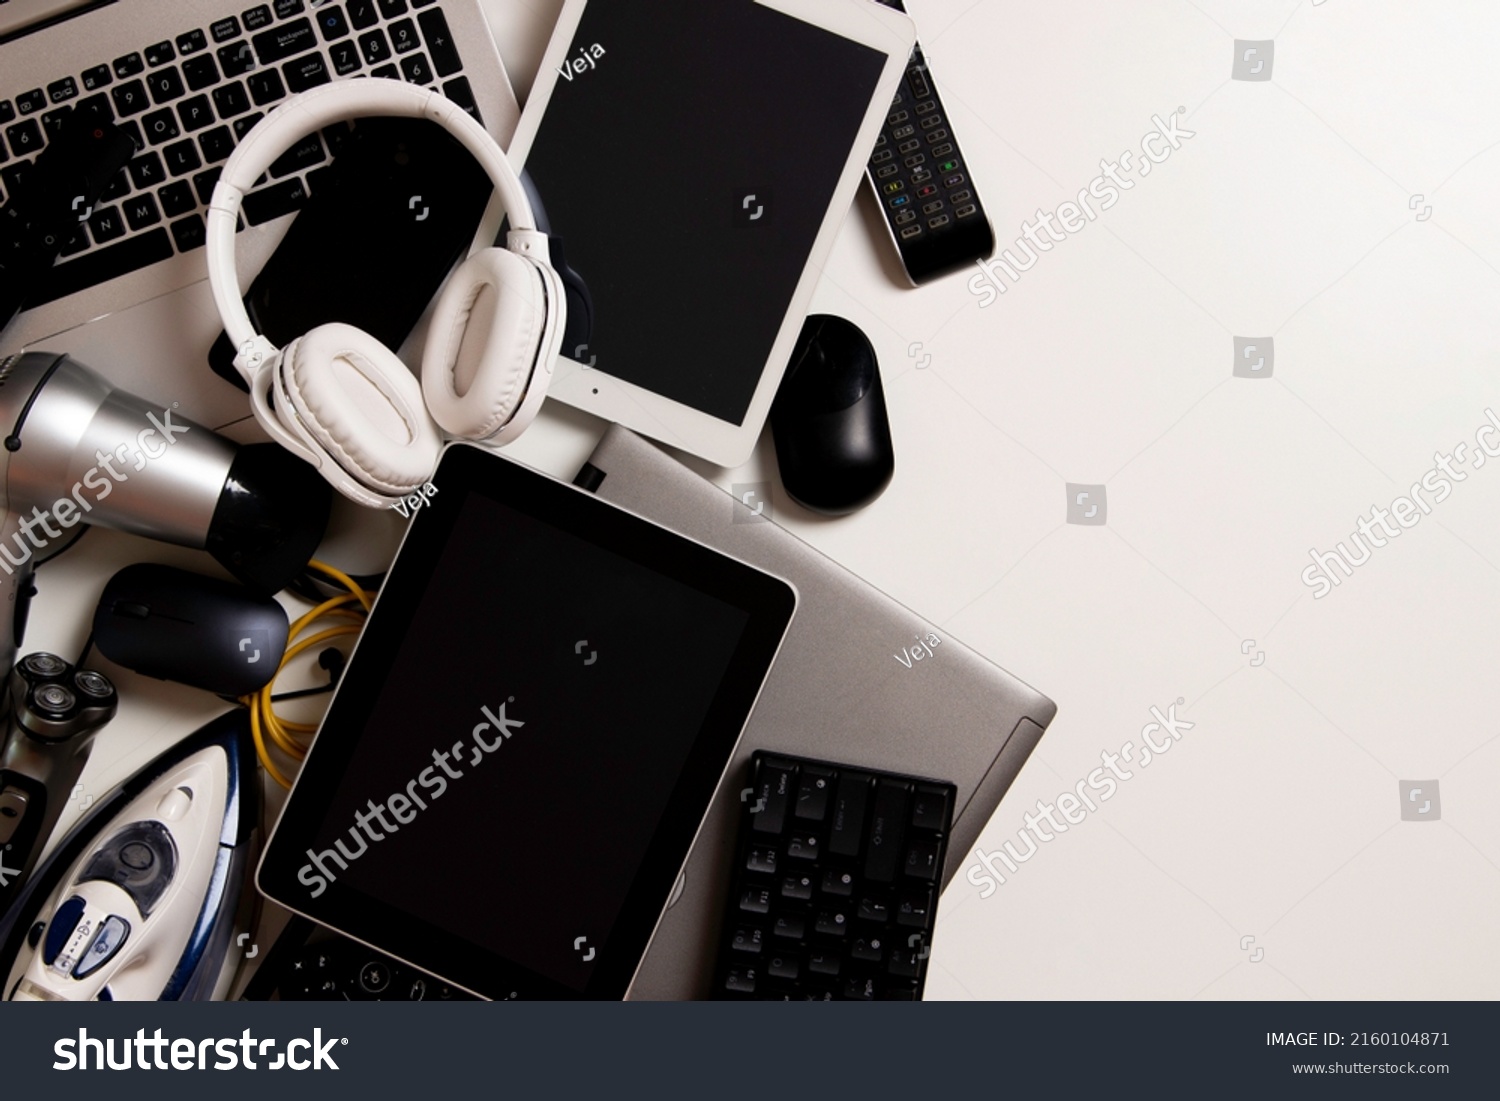 Old computers, digital tablets, mobile phones, many used electronic gadgets devices, broken household and appliances on white background. Planned obsolescence, electronic waste for recycling concept #2160104871